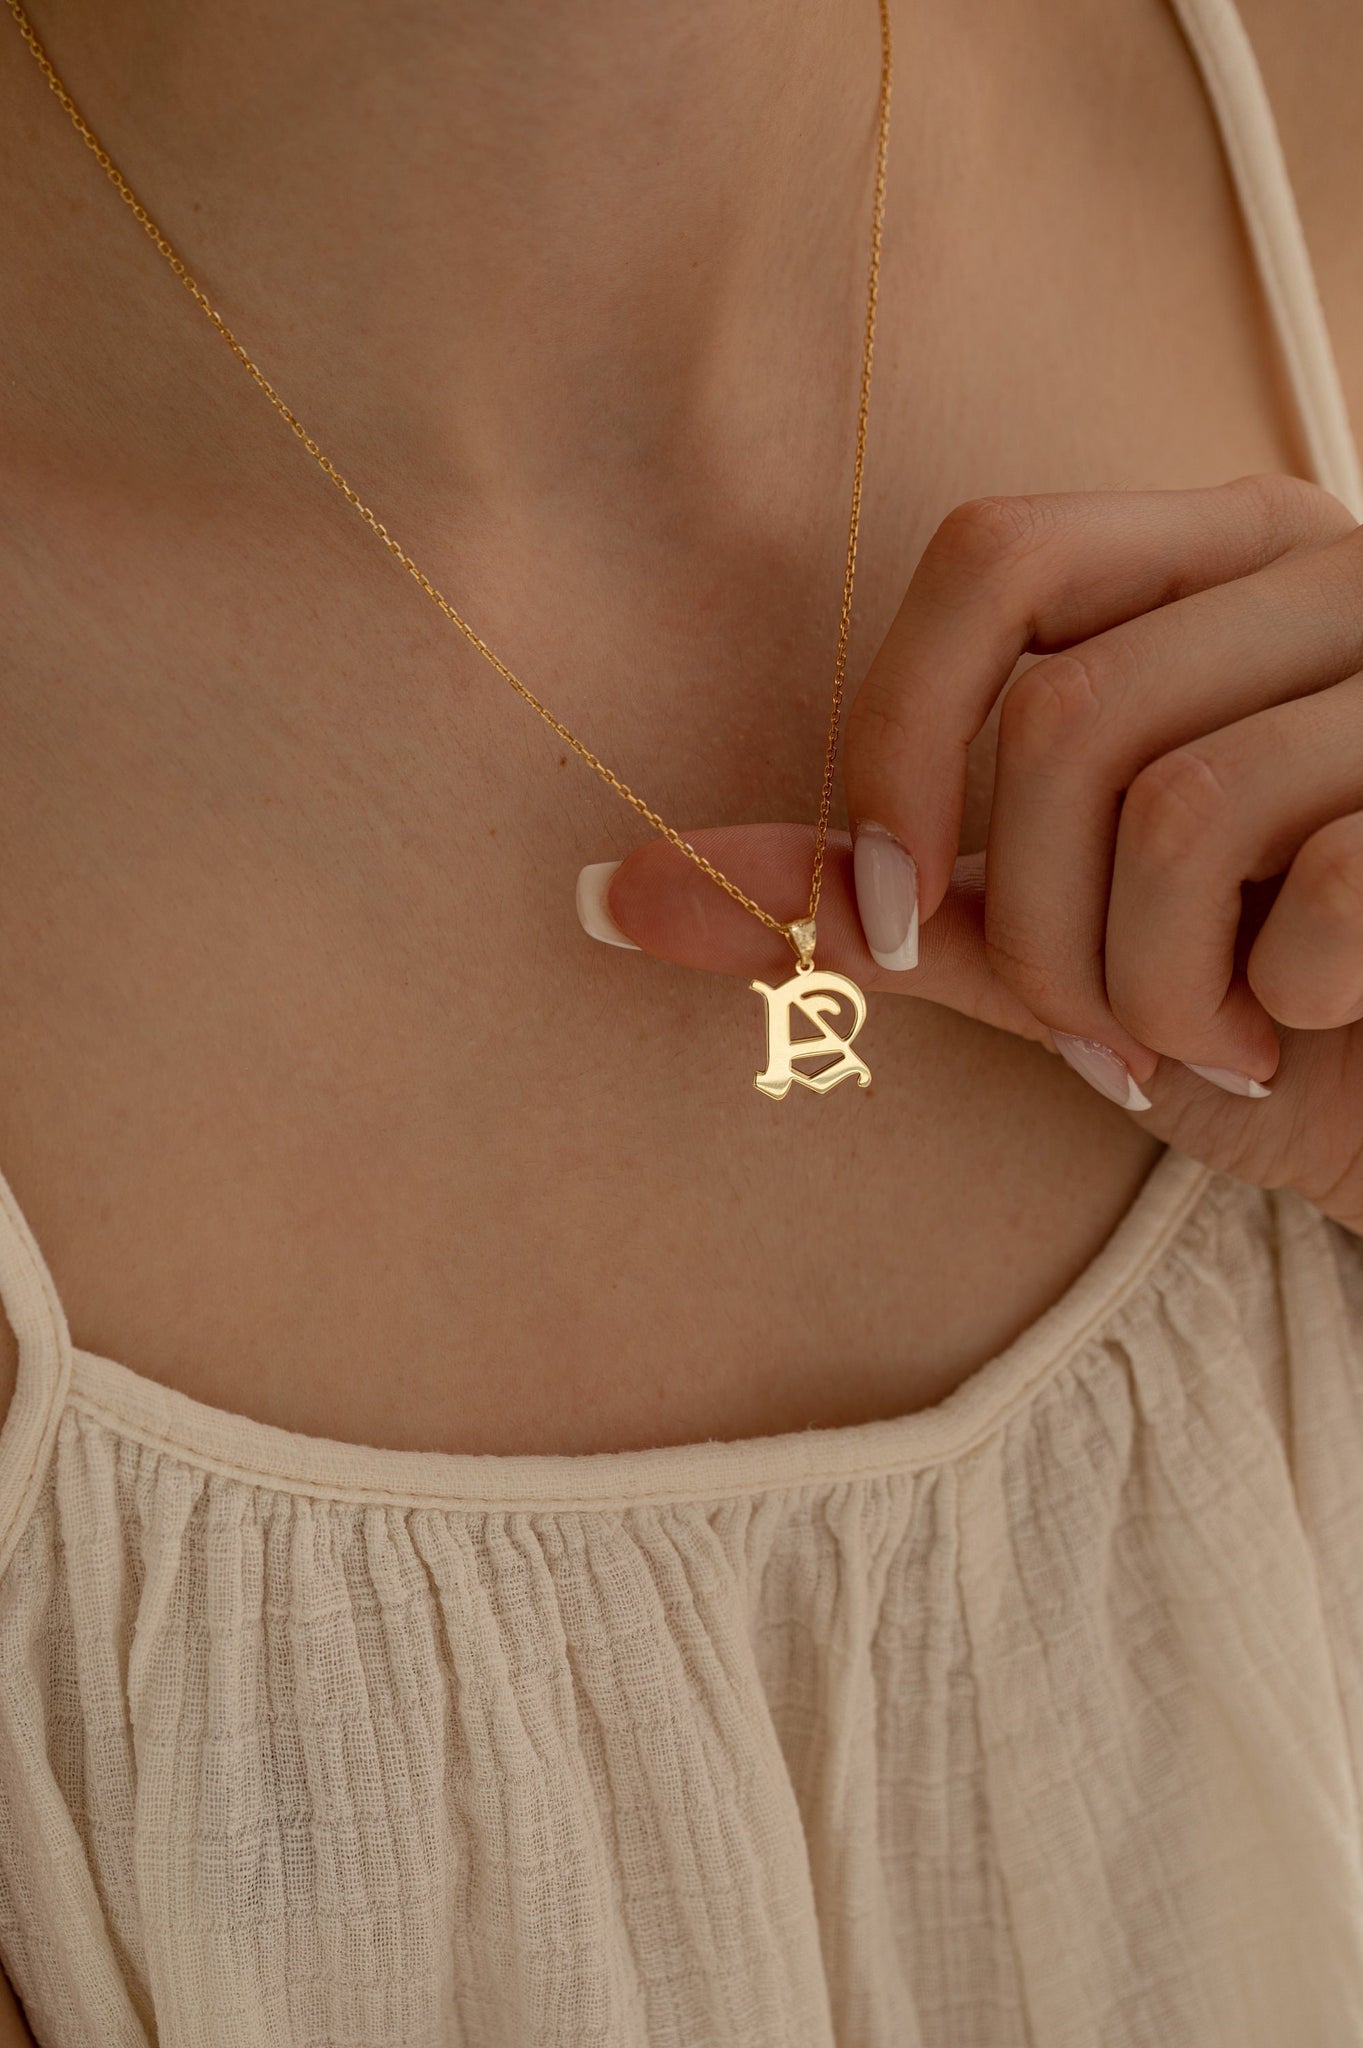 Personalized Gold Initial Necklace for Women - 14K Gold Plated Minimalist  Letter | eBay